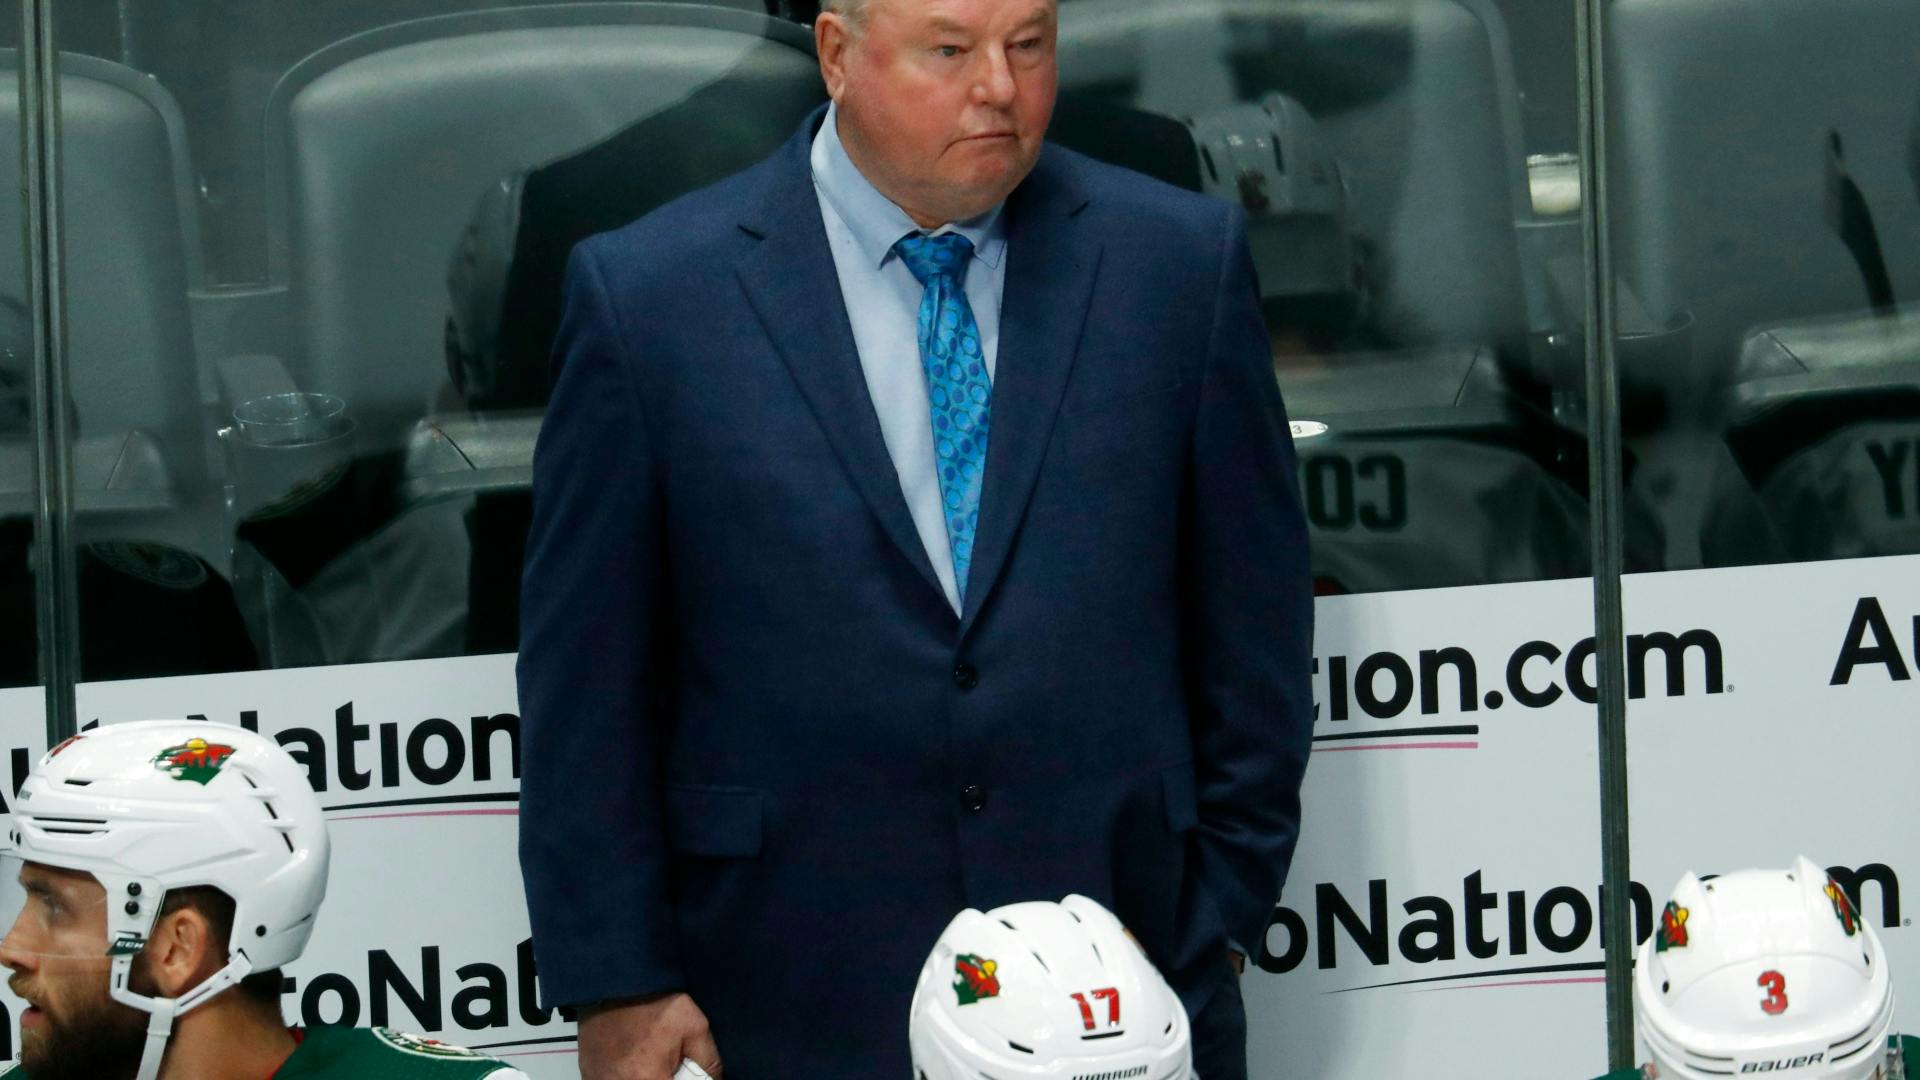 Coach Bruce Boudreau discusses the Wild's season-opening 4-1 loss to the Avalanche.